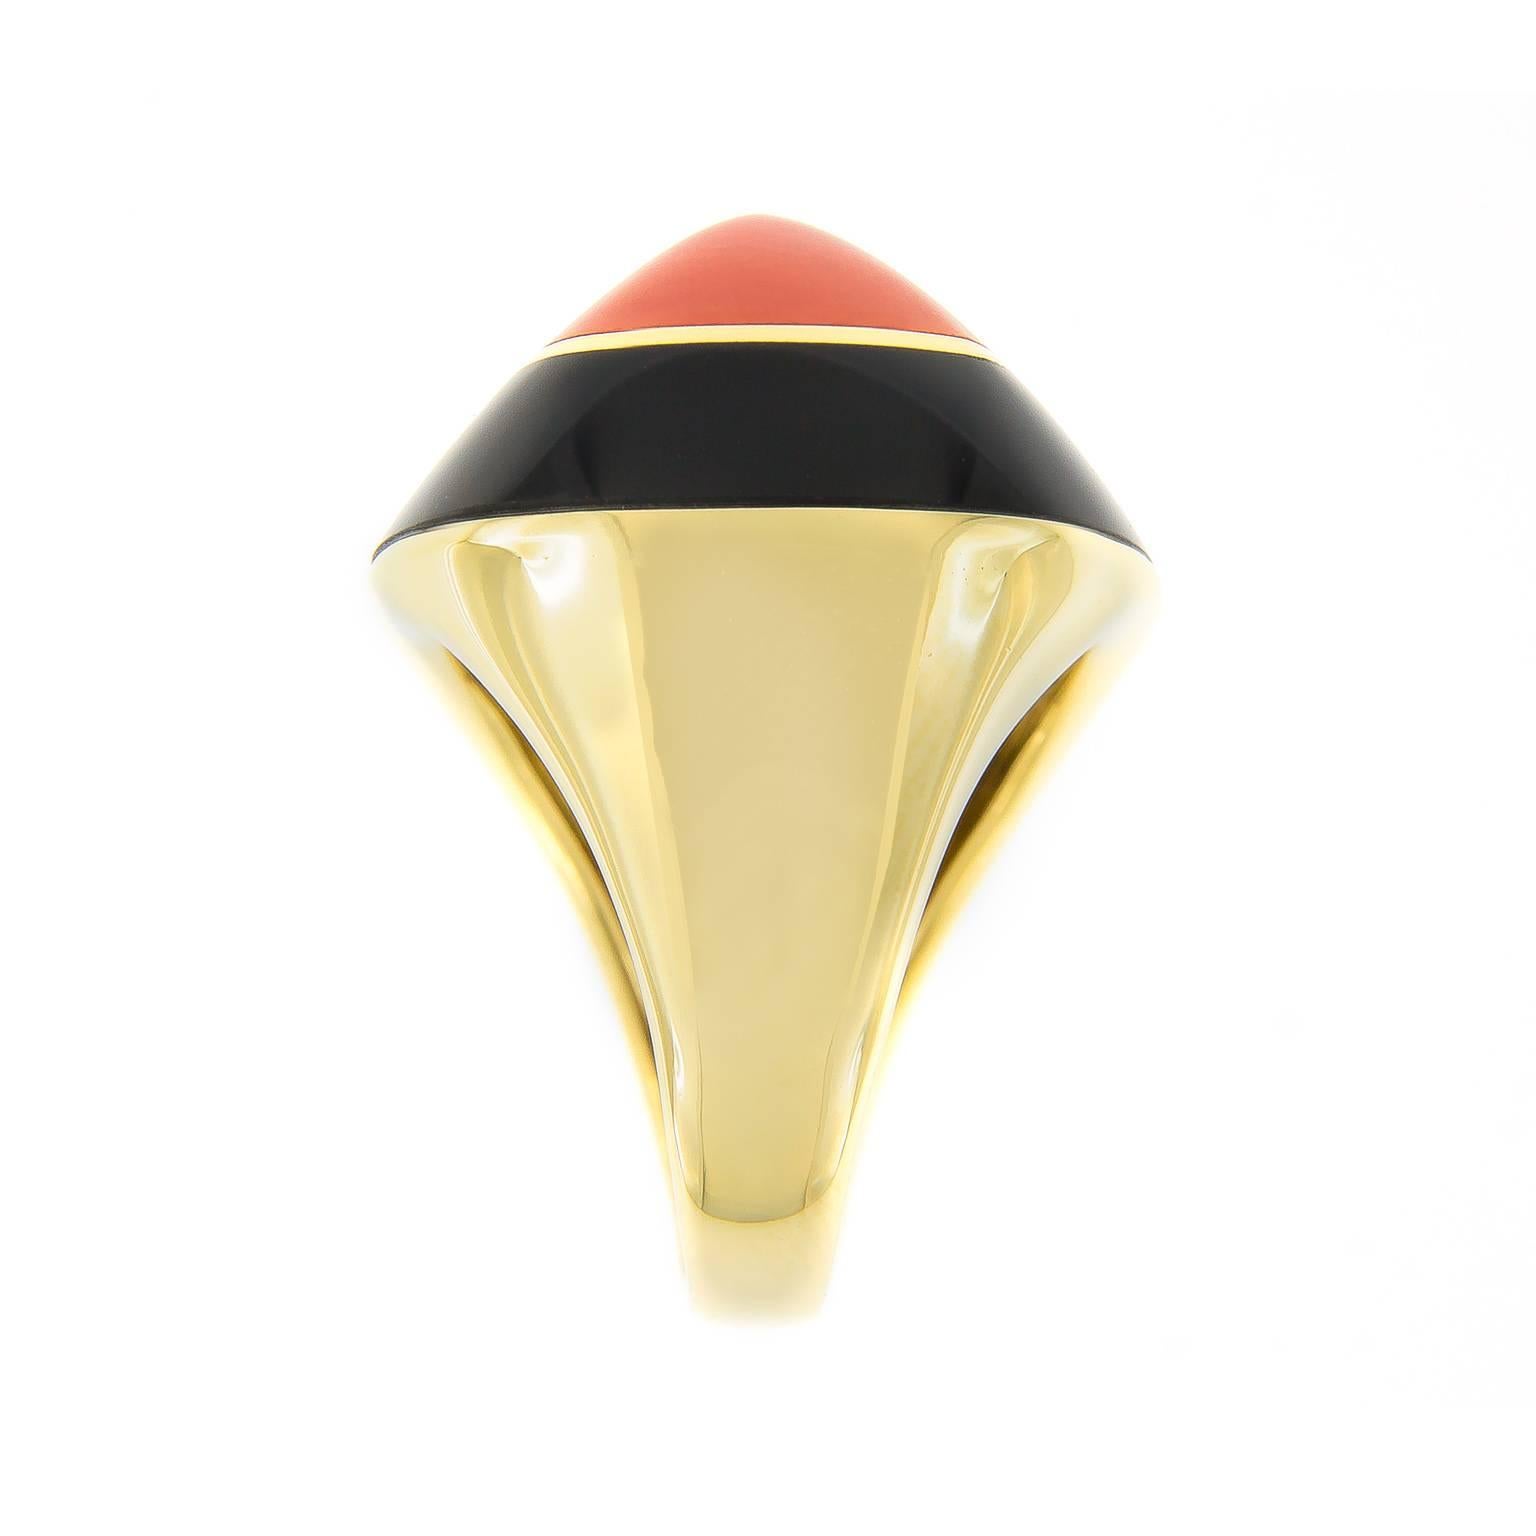 Make a bold statement with this fabulous 18k yellow gold ring made for Campanelli & Pear by Molina. Retro in style, this pyramidal ring features a fine Mediterranean coral center stone 1.81 carat surrounded by a band of black onyx.
18KYG
Hallmarked